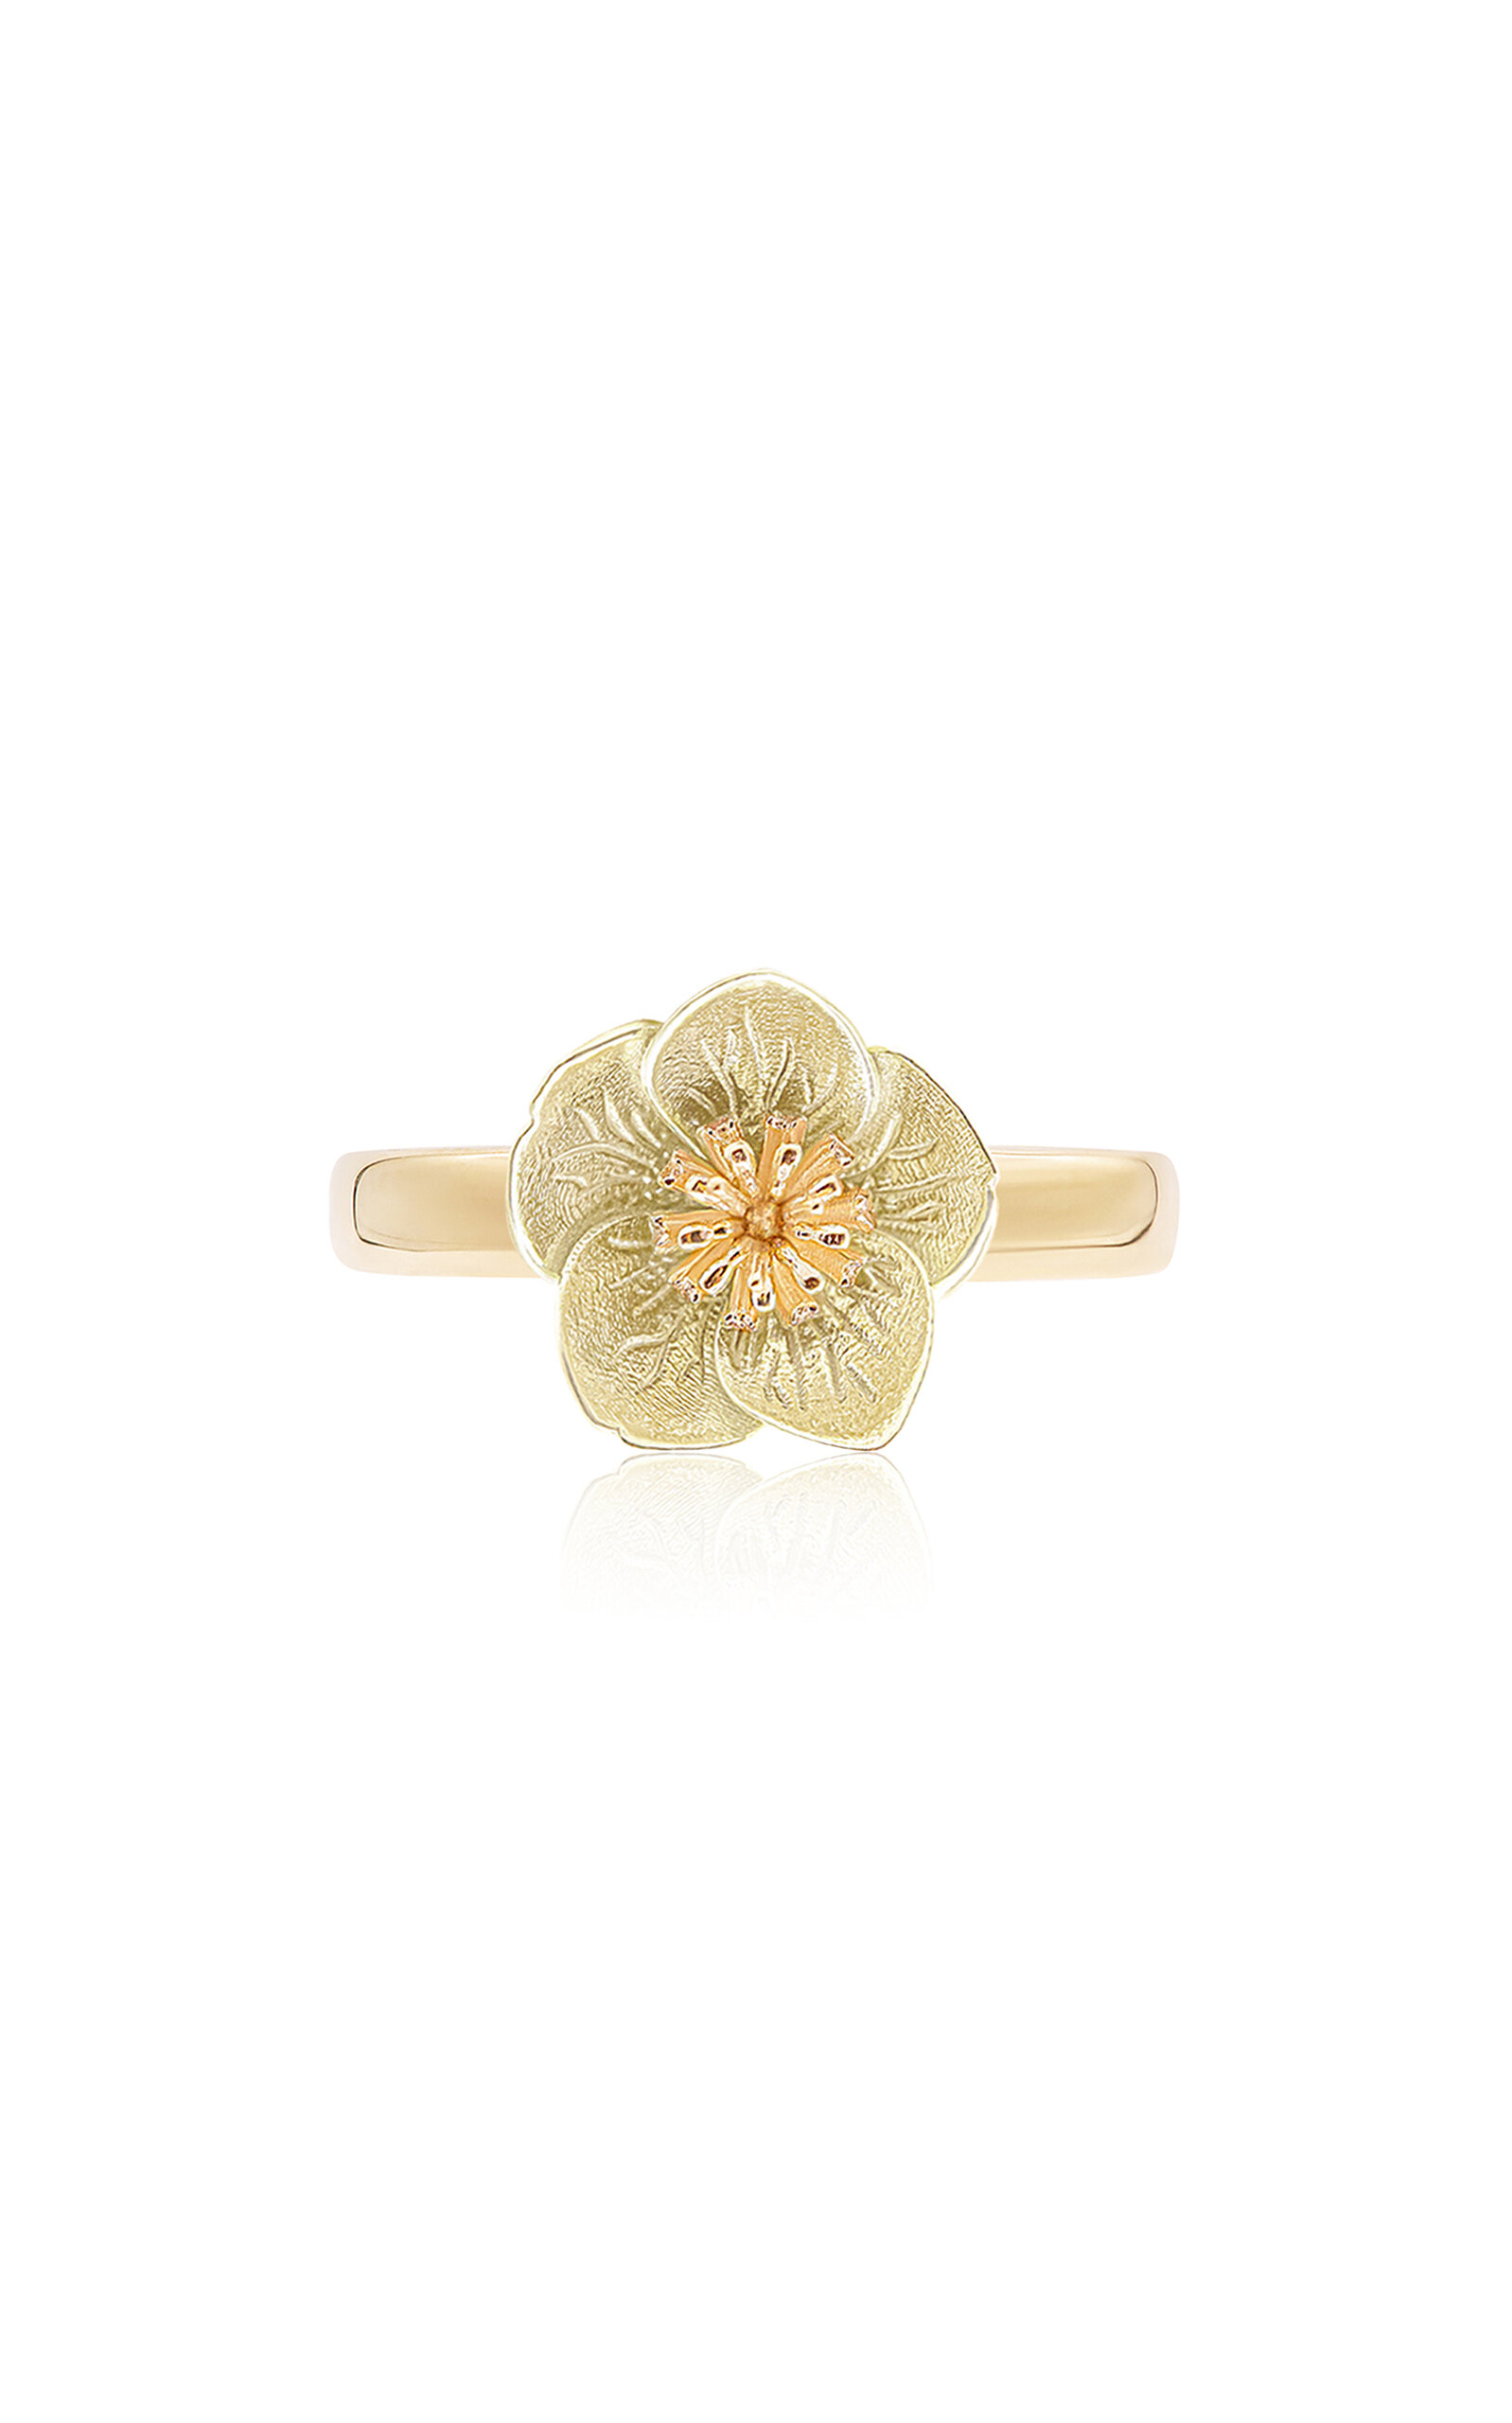 Maxi Flora 14K Yellow and Green Gold Ring